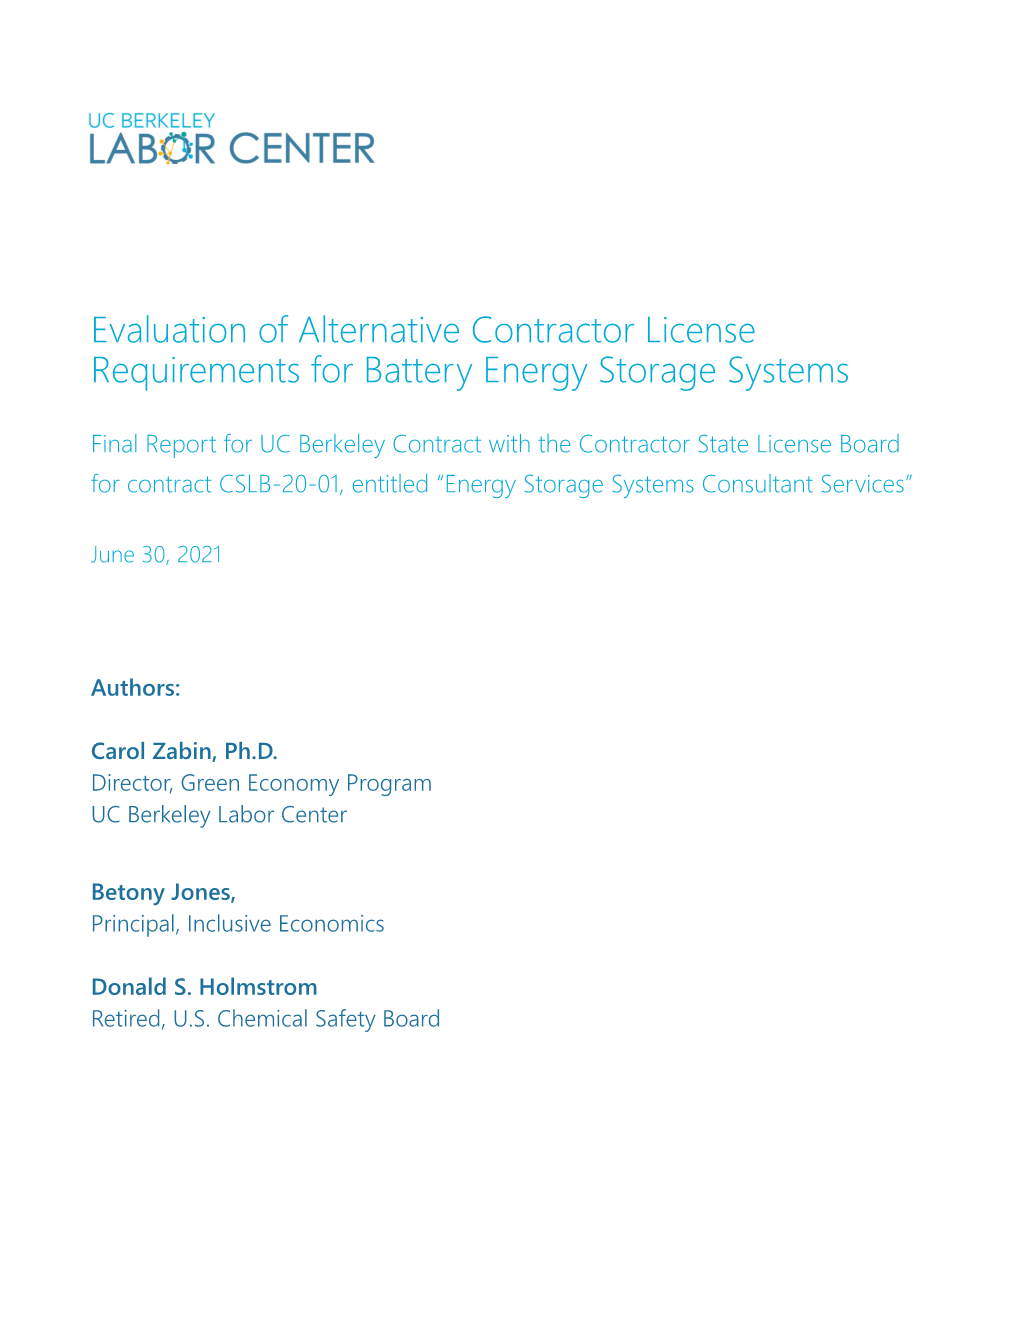 Evaluation of Alternative Contractor License Requirements for Battery Energy Storage Systems